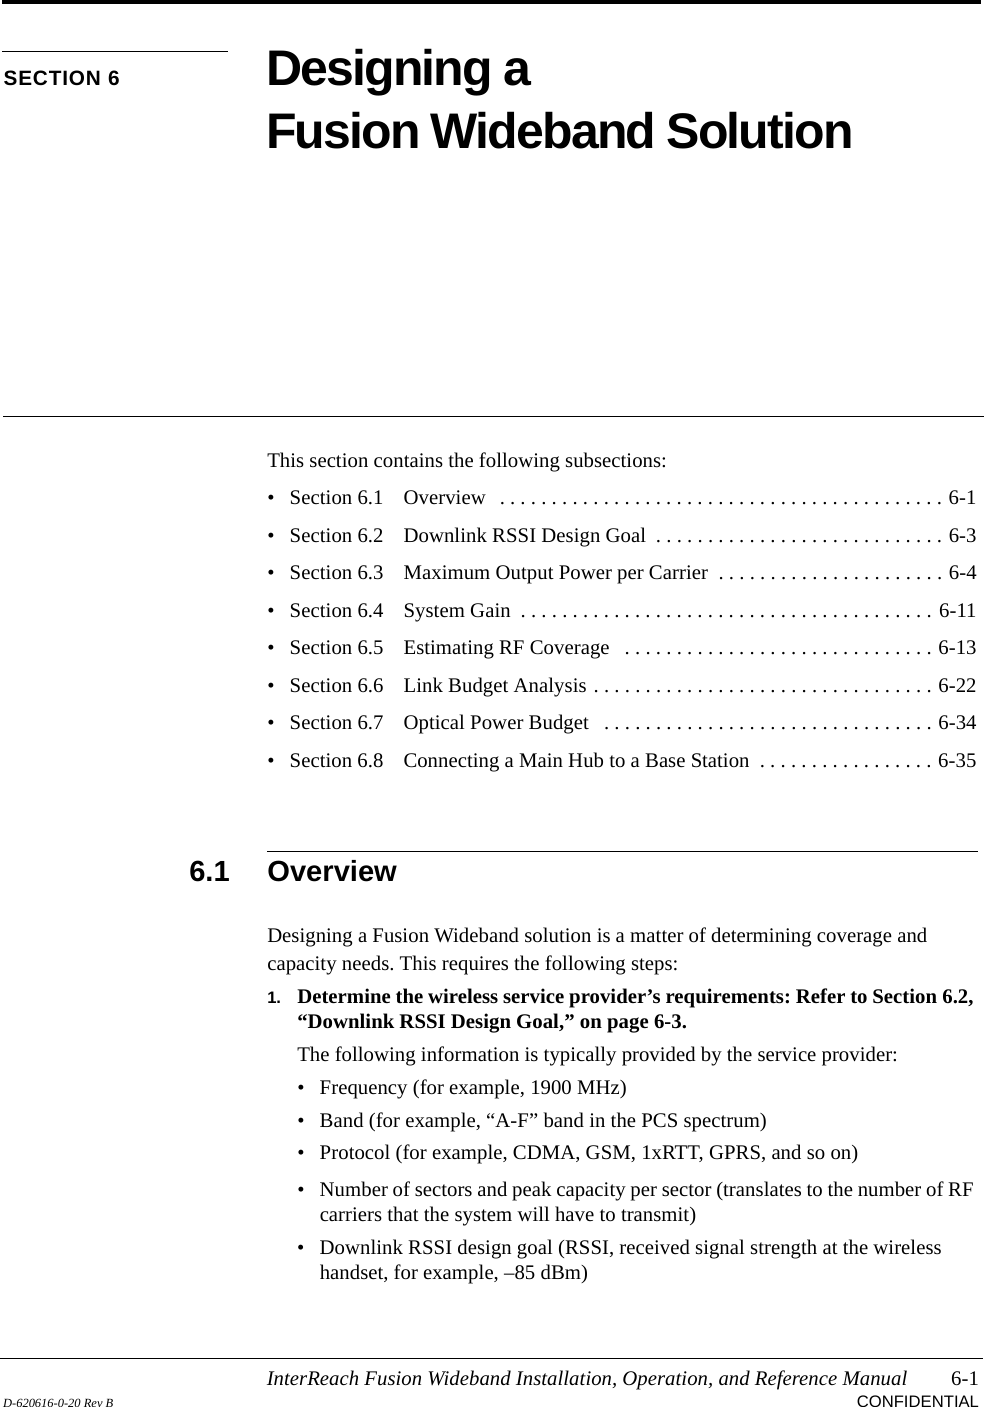 InterReach Fusion Wideband Installation, Operation, and Reference Manual 6-1D-620616-0-20 Rev B CONFIDENTIALSECTION 6 Designing a Fusion Wideband SolutionThis section contains the following subsections:• Section 6.1   Overview   . . . . . . . . . . . . . . . . . . . . . . . . . . . . . . . . . . . . . . . . . . . 6-1• Section 6.2   Downlink RSSI Design Goal  . . . . . . . . . . . . . . . . . . . . . . . . . . . . 6-3• Section 6.3   Maximum Output Power per Carrier  . . . . . . . . . . . . . . . . . . . . . . 6-4• Section 6.4   System Gain  . . . . . . . . . . . . . . . . . . . . . . . . . . . . . . . . . . . . . . . . 6-11• Section 6.5   Estimating RF Coverage   . . . . . . . . . . . . . . . . . . . . . . . . . . . . . . 6-13• Section 6.6   Link Budget Analysis . . . . . . . . . . . . . . . . . . . . . . . . . . . . . . . . . 6-22• Section 6.7   Optical Power Budget   . . . . . . . . . . . . . . . . . . . . . . . . . . . . . . . . 6-34• Section 6.8   Connecting a Main Hub to a Base Station  . . . . . . . . . . . . . . . . . 6-356.1 OverviewDesigning a Fusion Wideband solution is a matter of determining coverage and capacity needs. This requires the following steps:1. Determine the wireless service provider’s requirements: Refer to Section 6.2, “Downlink RSSI Design Goal,” on page 6-3.The following information is typically provided by the service provider:• Frequency (for example, 1900 MHz)• Band (for example, “A-F” band in the PCS spectrum)• Protocol (for example, CDMA, GSM, 1xRTT, GPRS, and so on)• Number of sectors and peak capacity per sector (translates to the number of RF carriers that the system will have to transmit)• Downlink RSSI design goal (RSSI, received signal strength at the wireless handset, for example, –85 dBm)